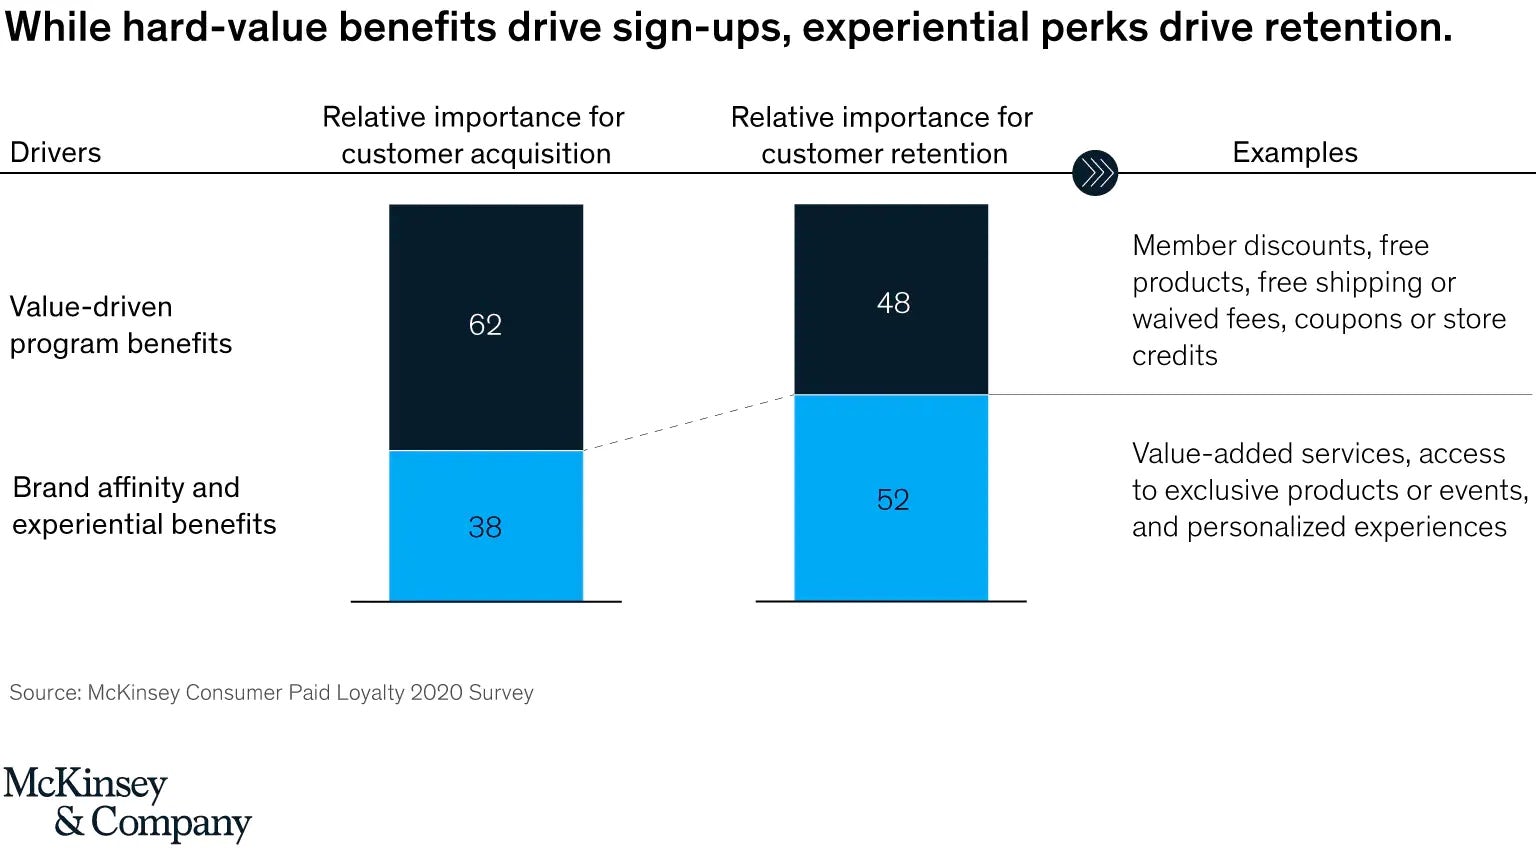 McKinsey found that value-add services, exclusive access, and personalized experience drive more paid loyalty program retention than cost-driven bonuses — which is the reverse of what gets customers to join such a program.